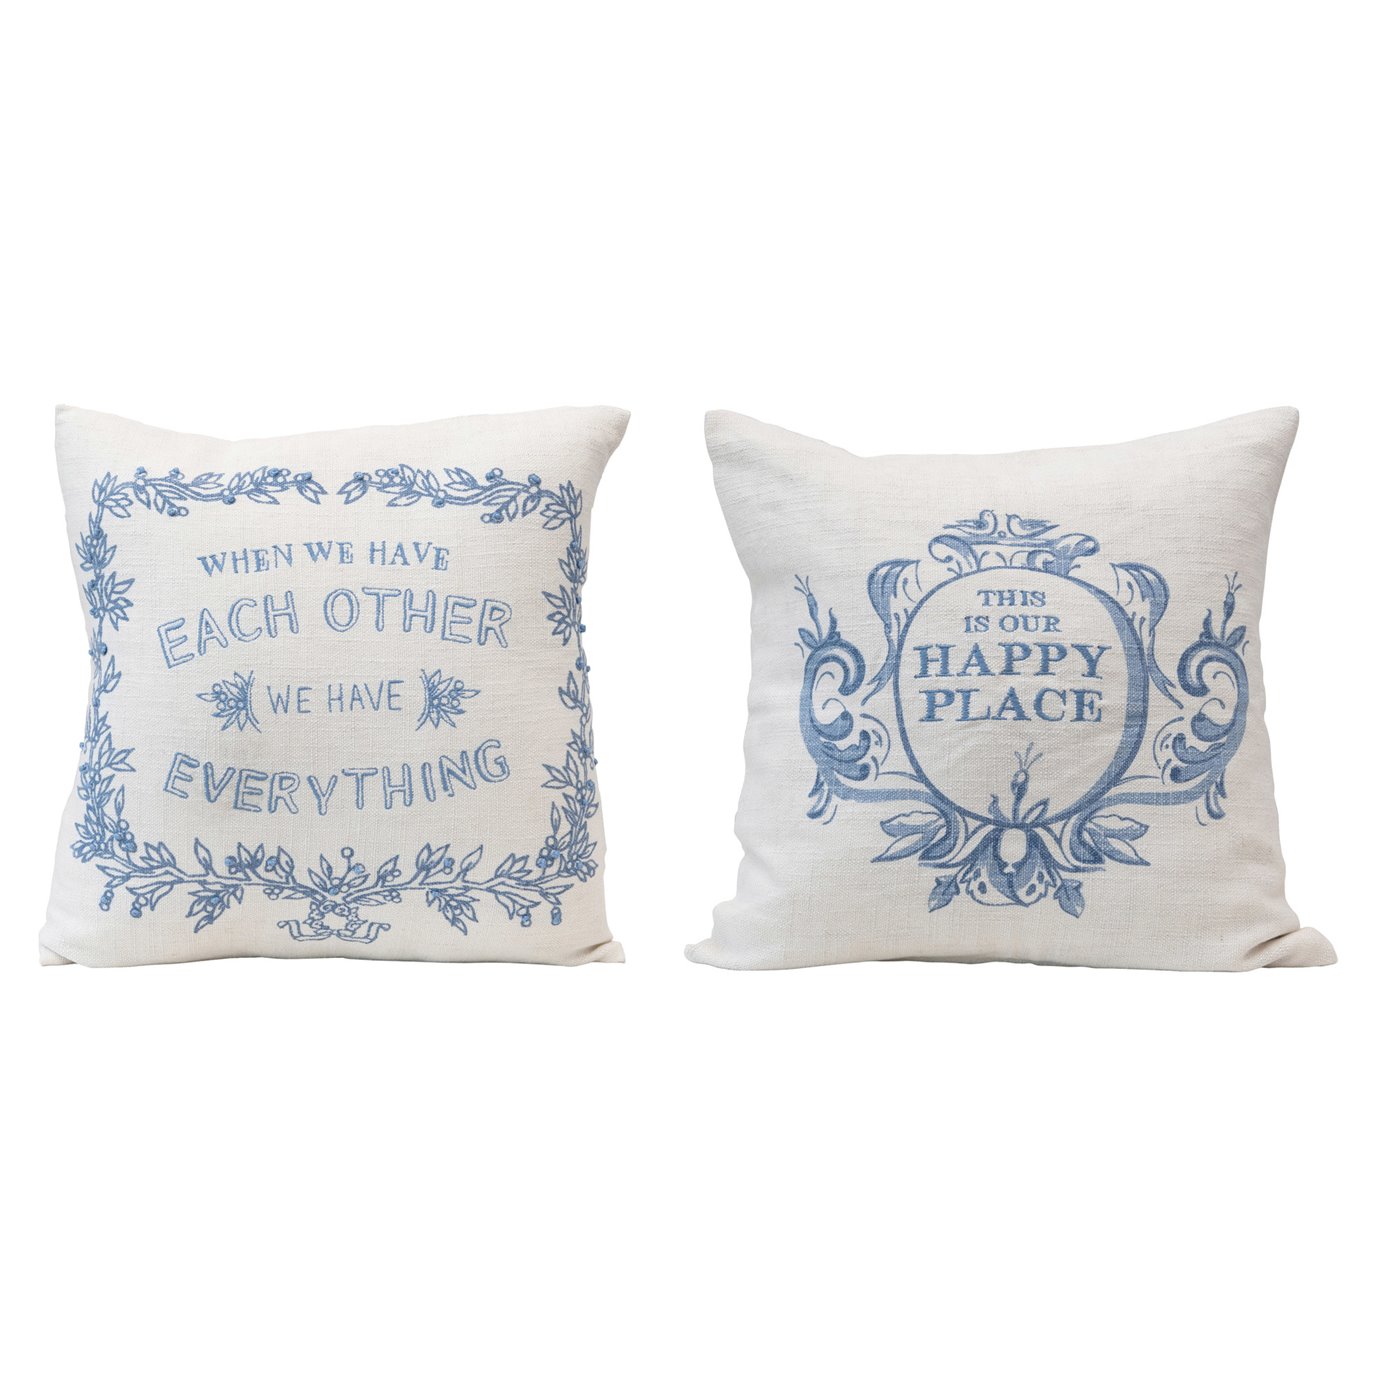 18" Square Linen Blend Embroidered Pillow w/ Saying, Cream Color & Blue, 2 Styles ©